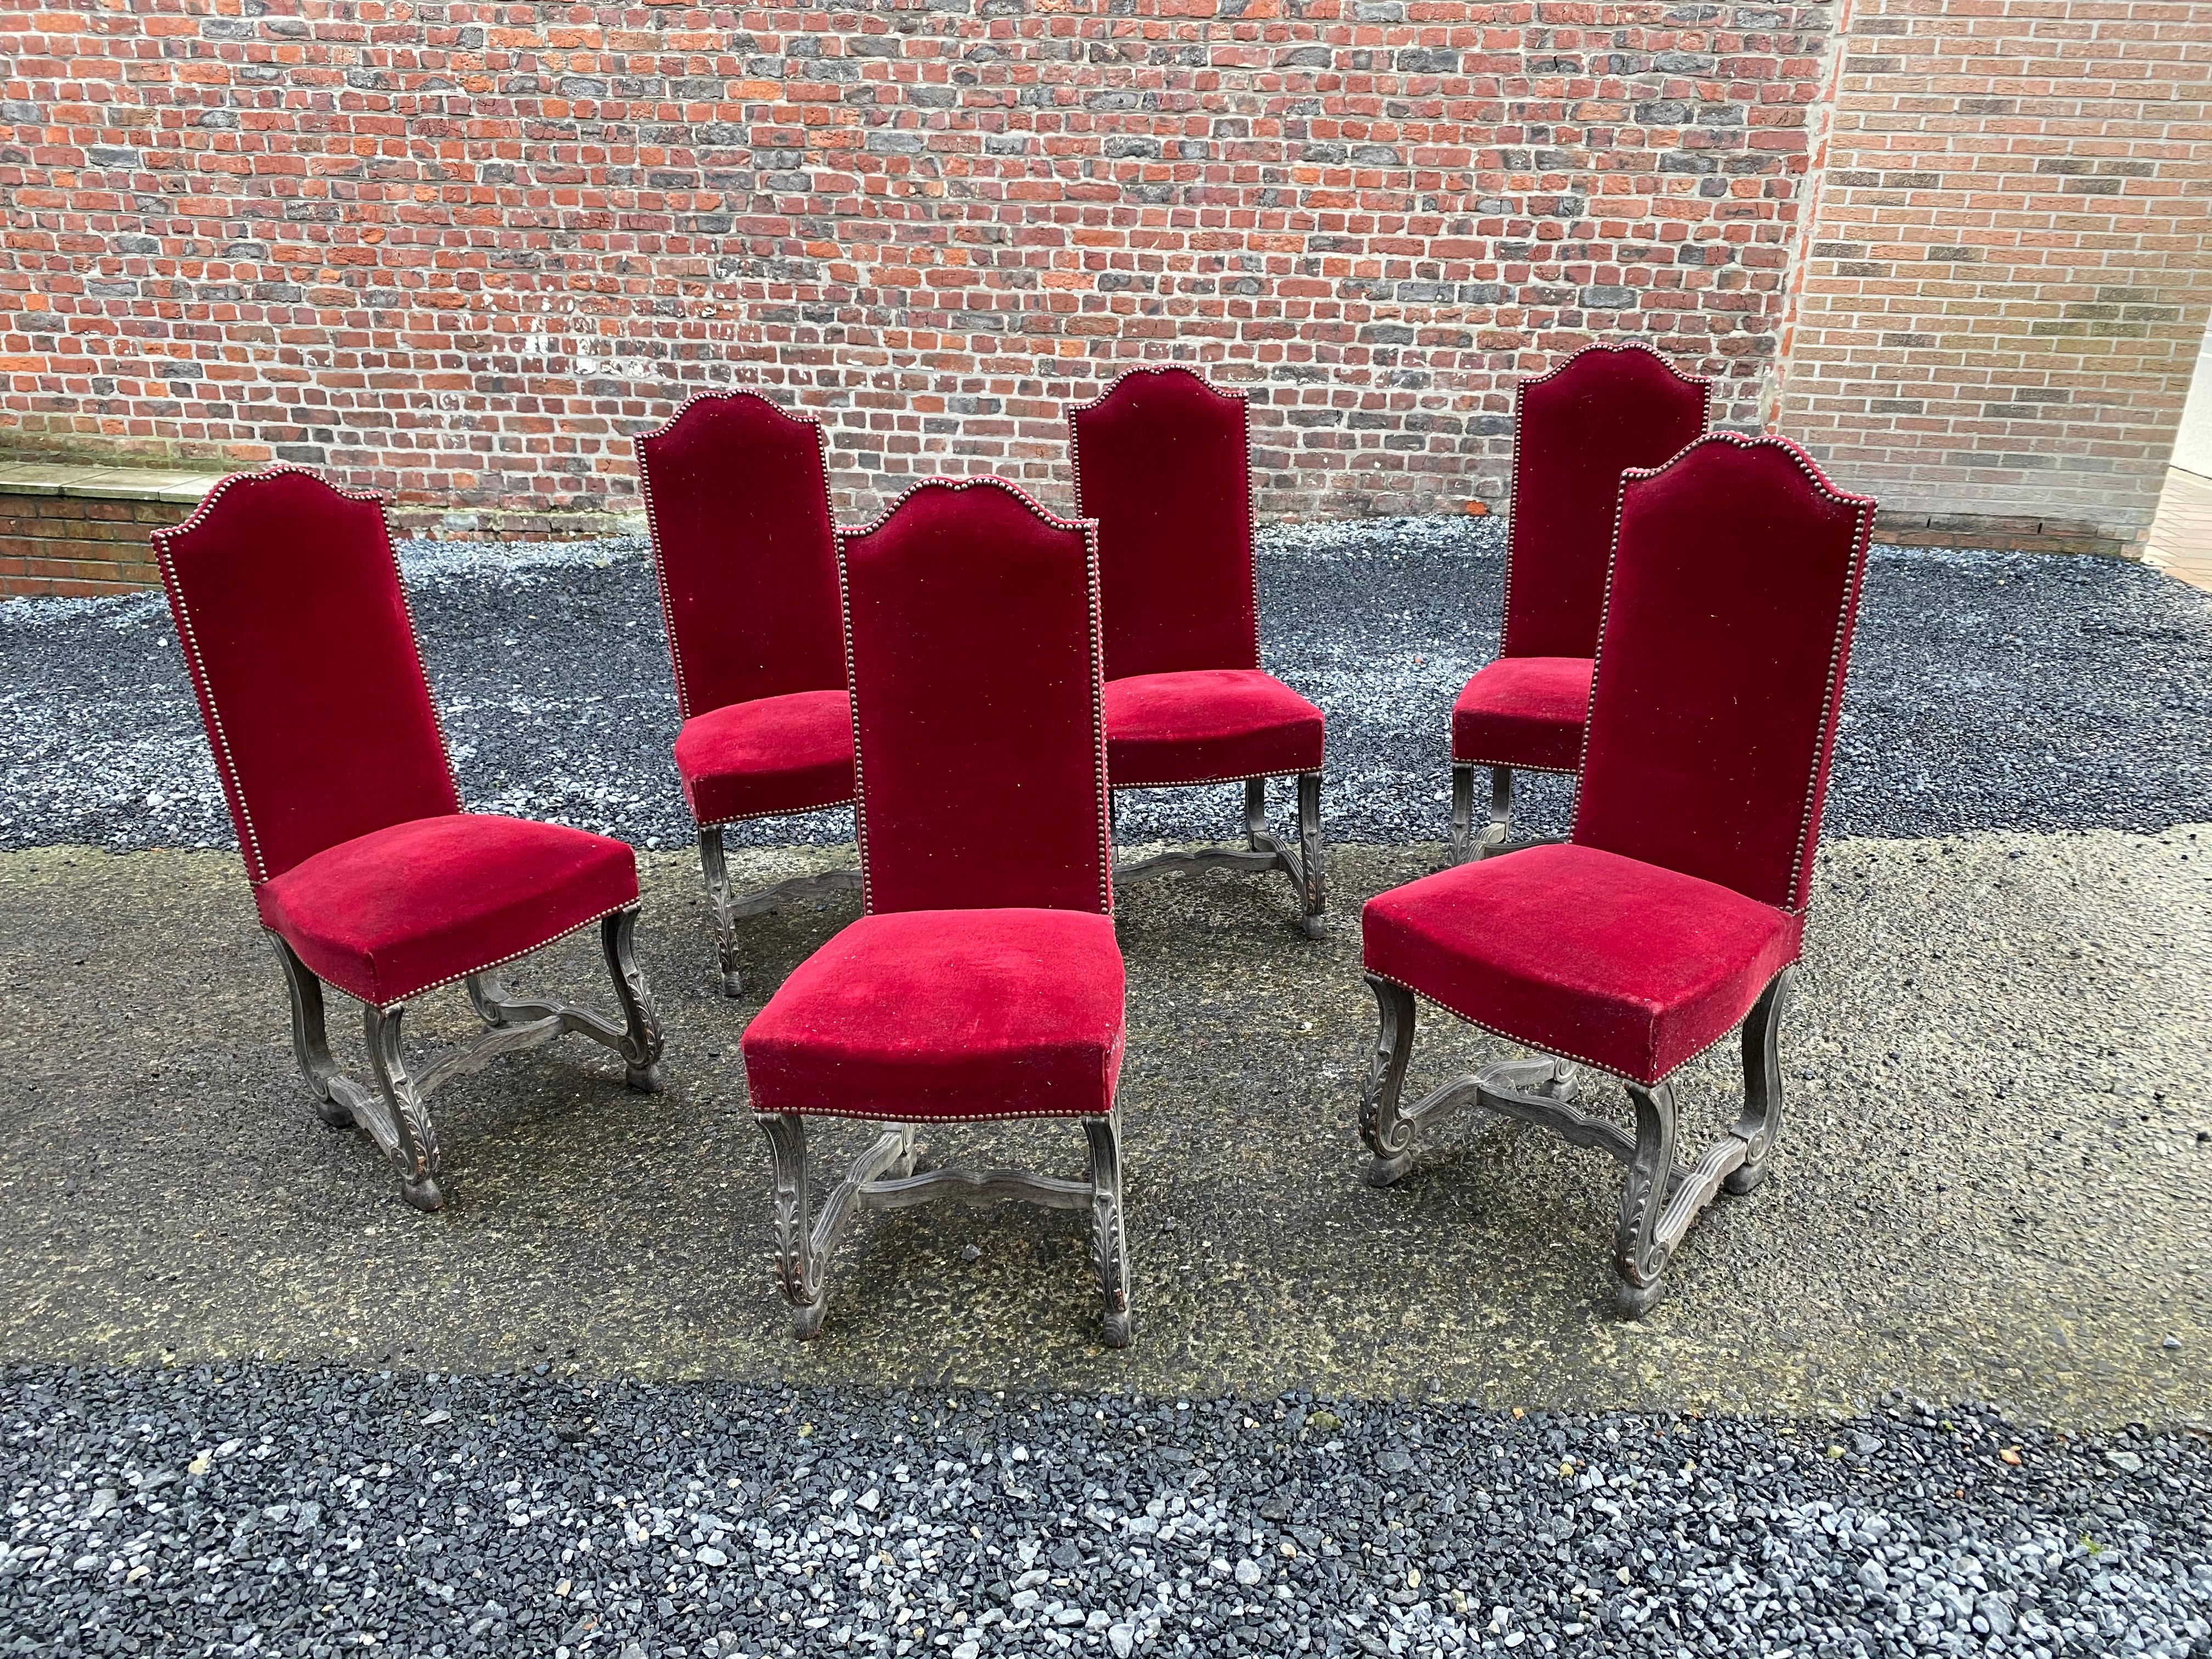 6 neoclassic chairs in blackened and ceruse oak, circa 1940-1950.